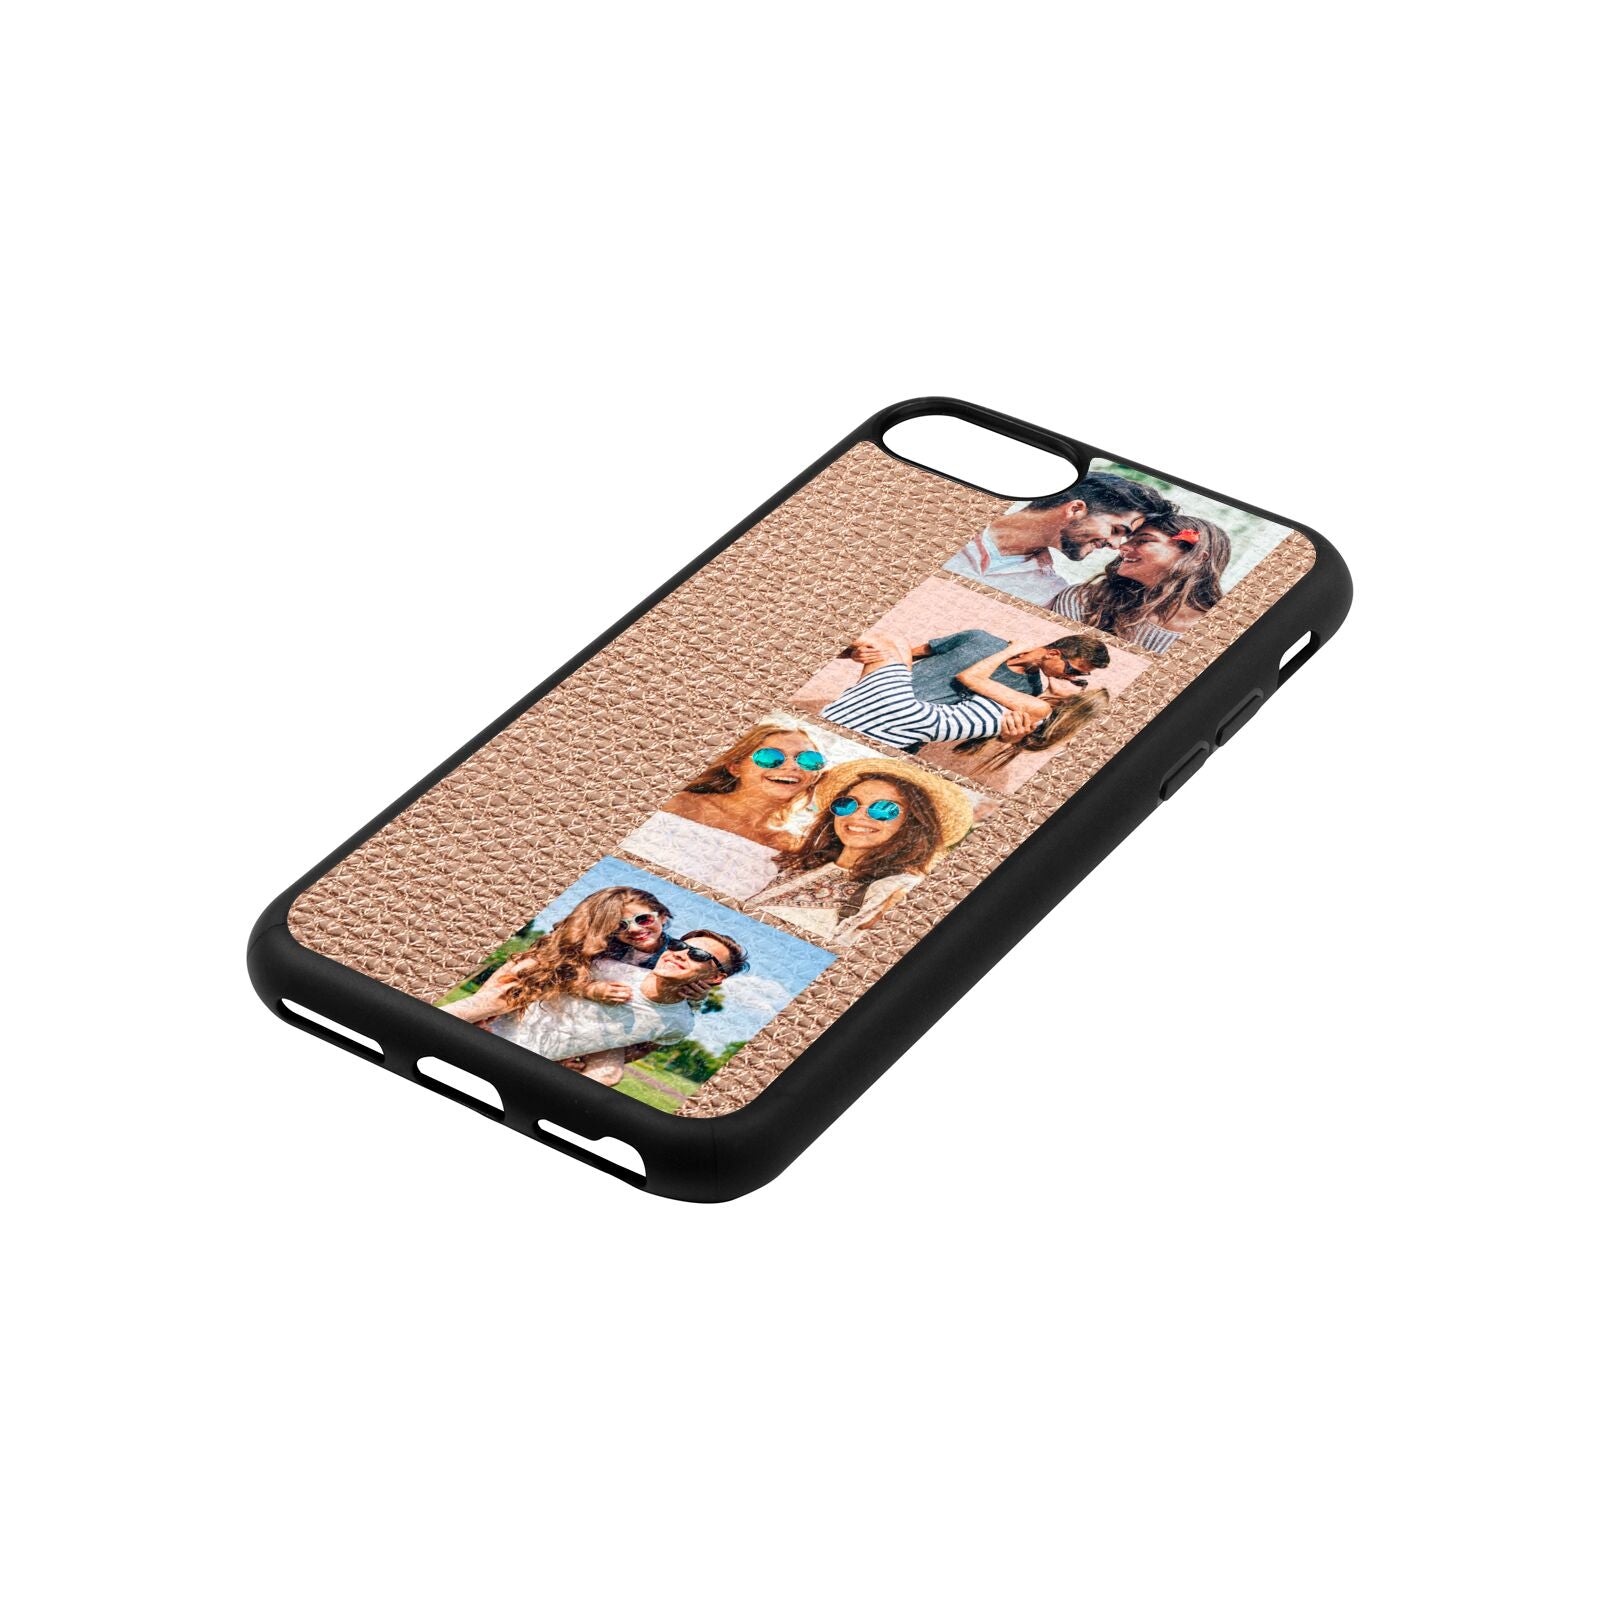 Photo Strip Montage Upload Rose Gold Pebble Leather iPhone 8 Case Side Angle